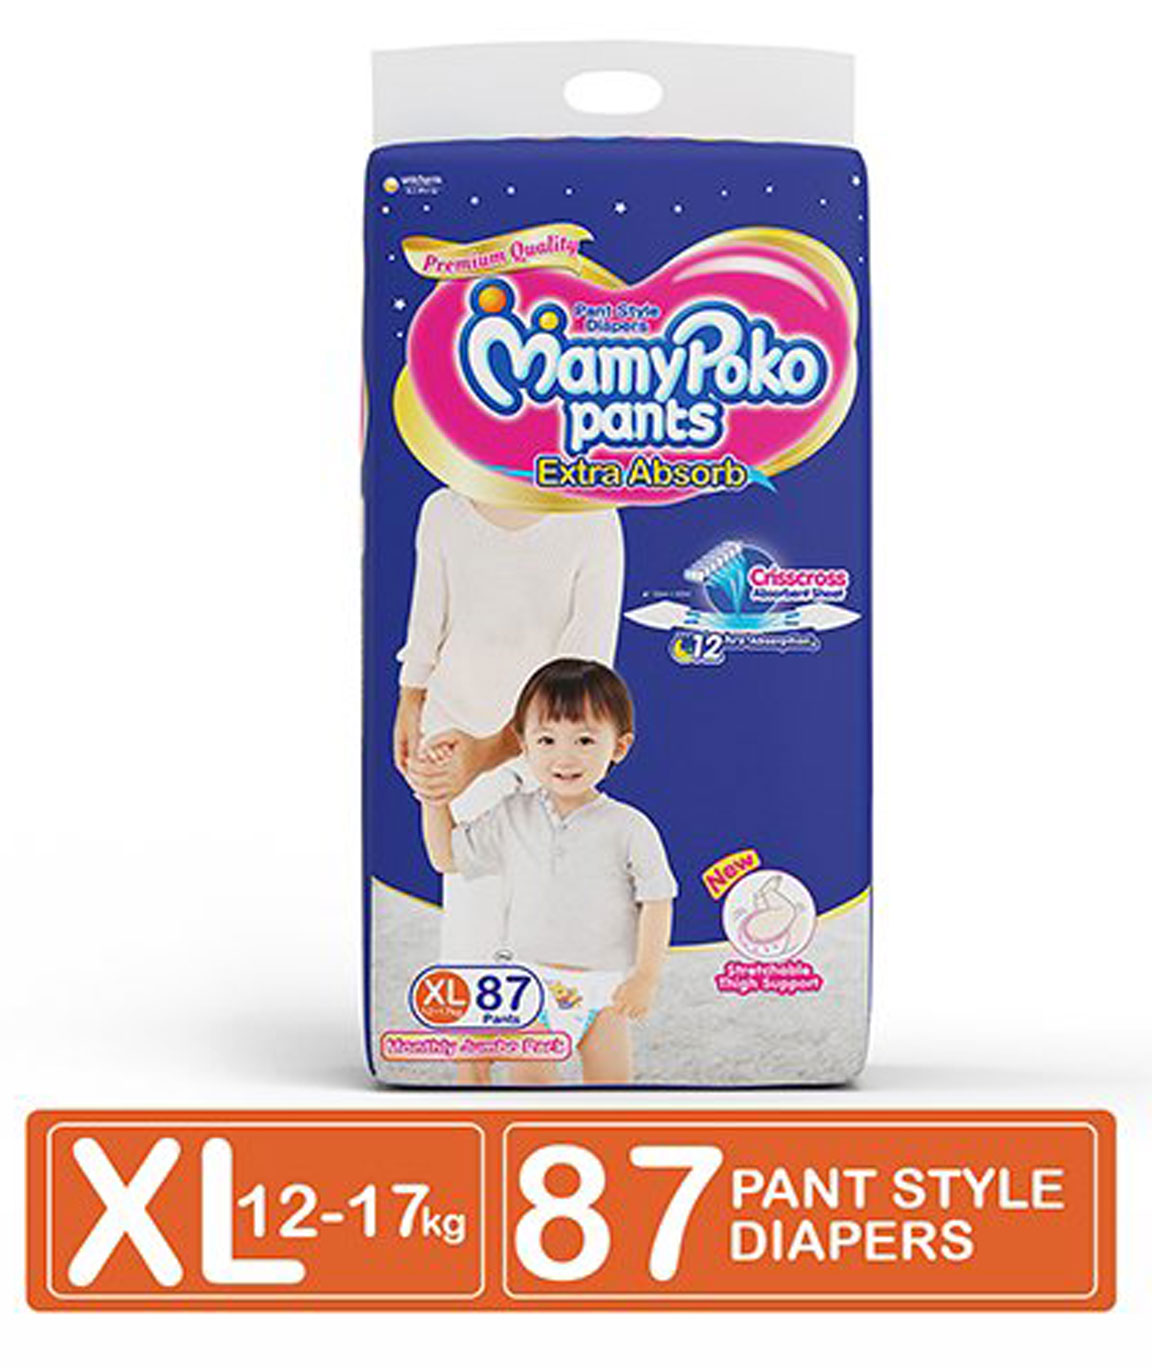 mamypoko pants extra absorb diaper monthly jumbo pack extra large 87 diapers blue h3